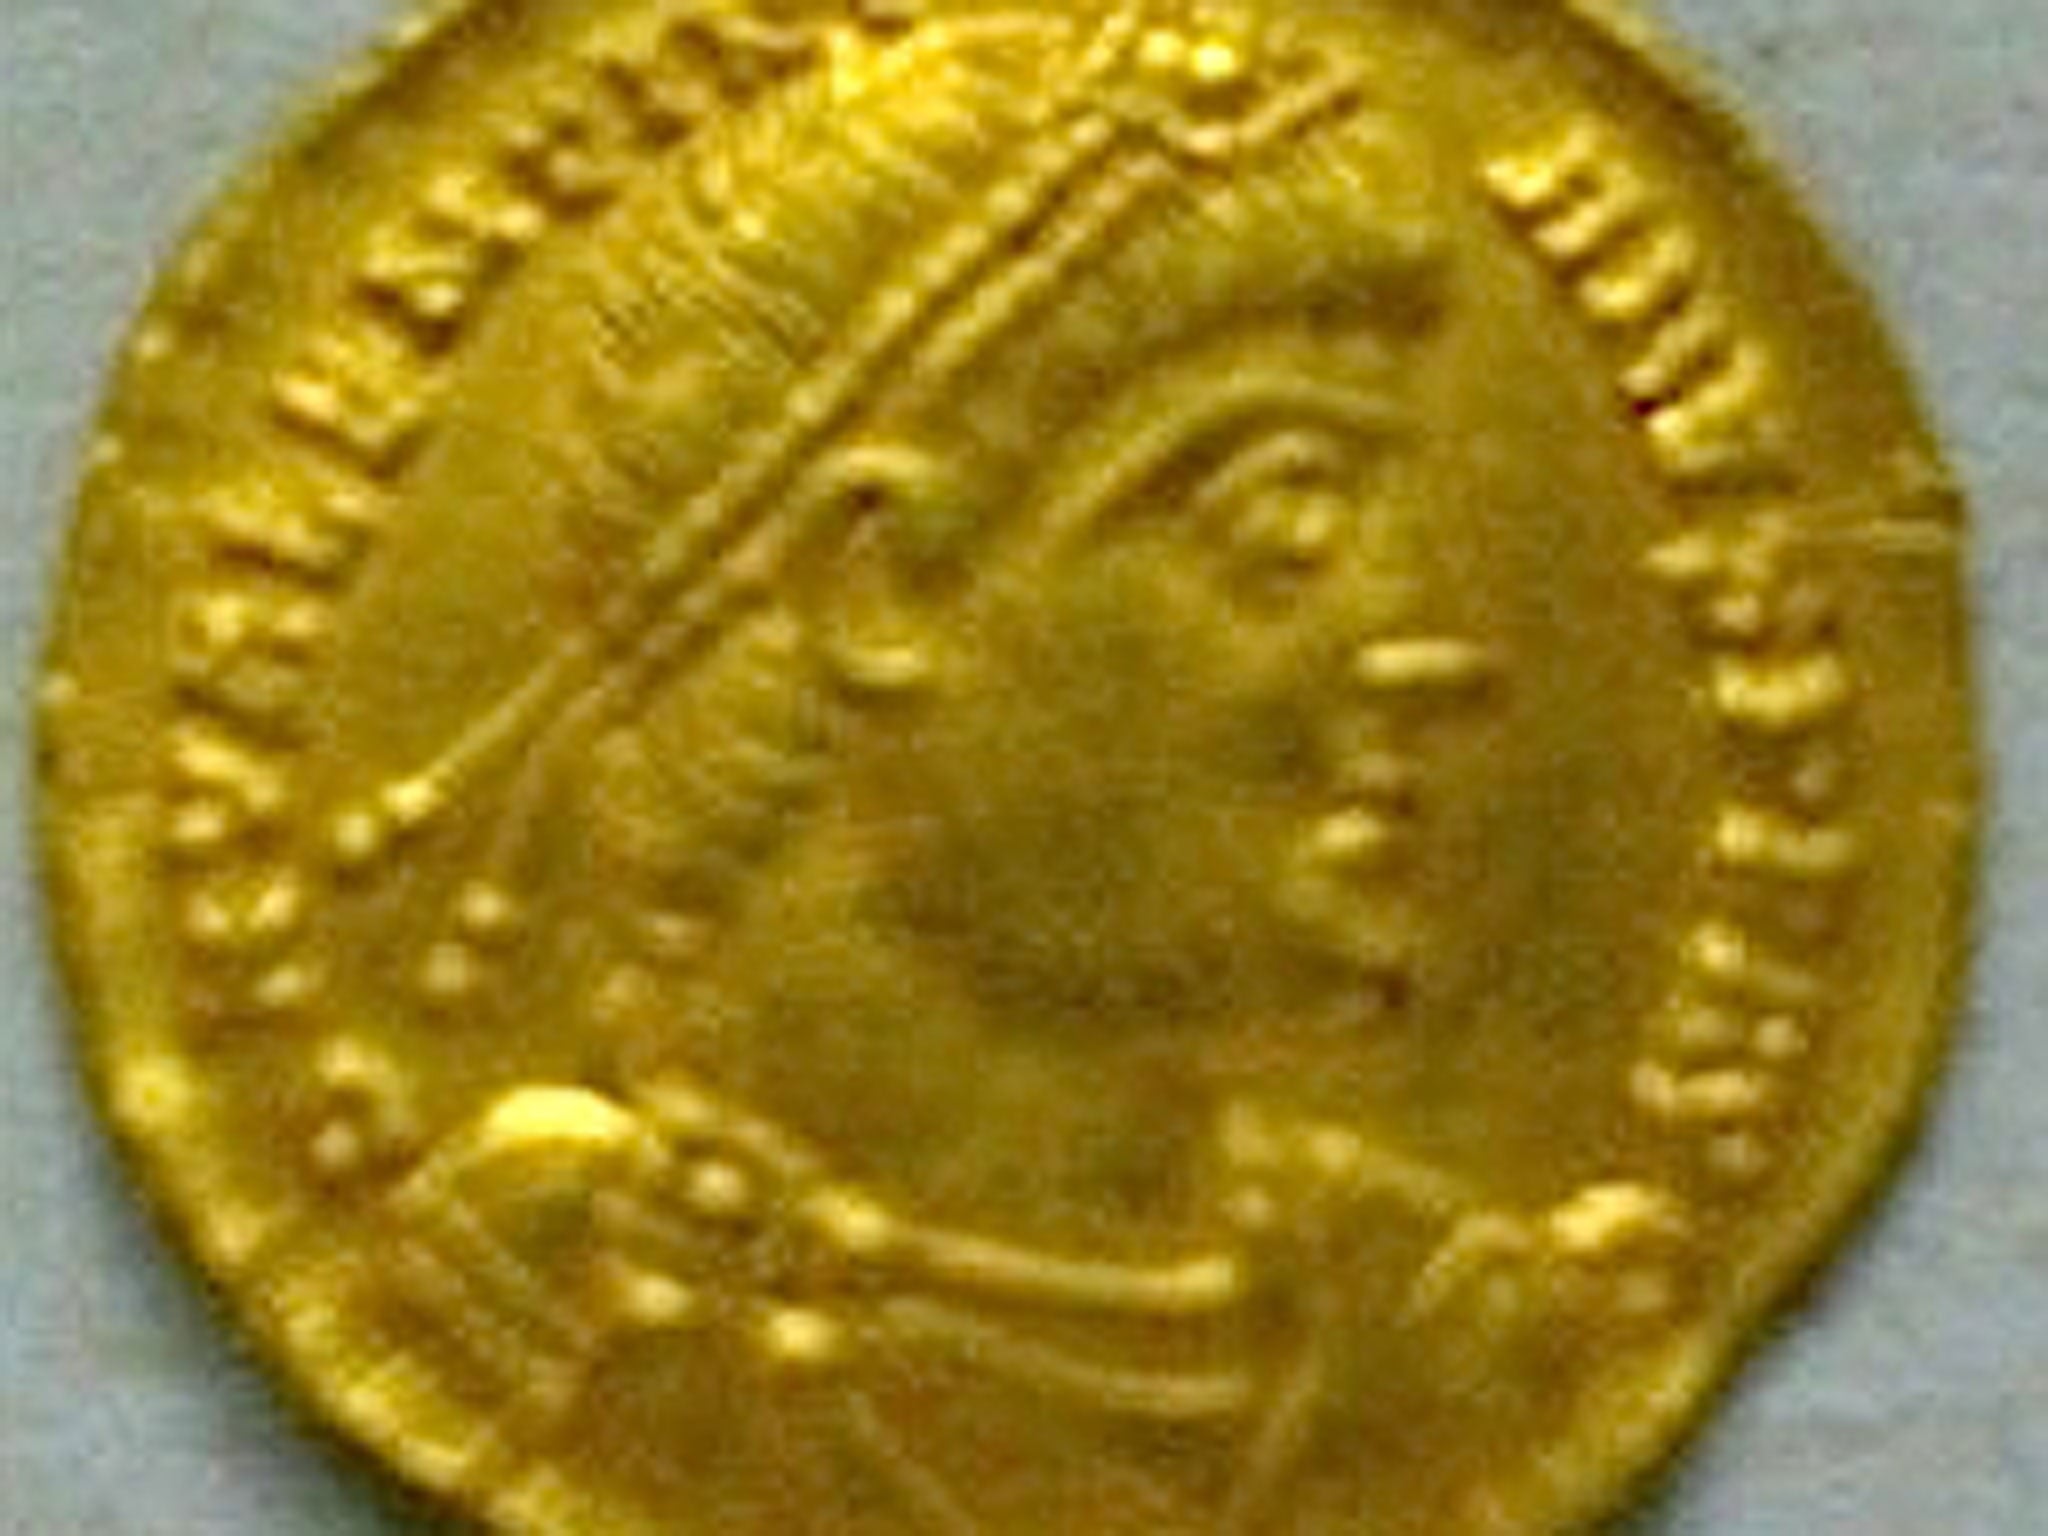 A gold coin stolen by Roy Wood